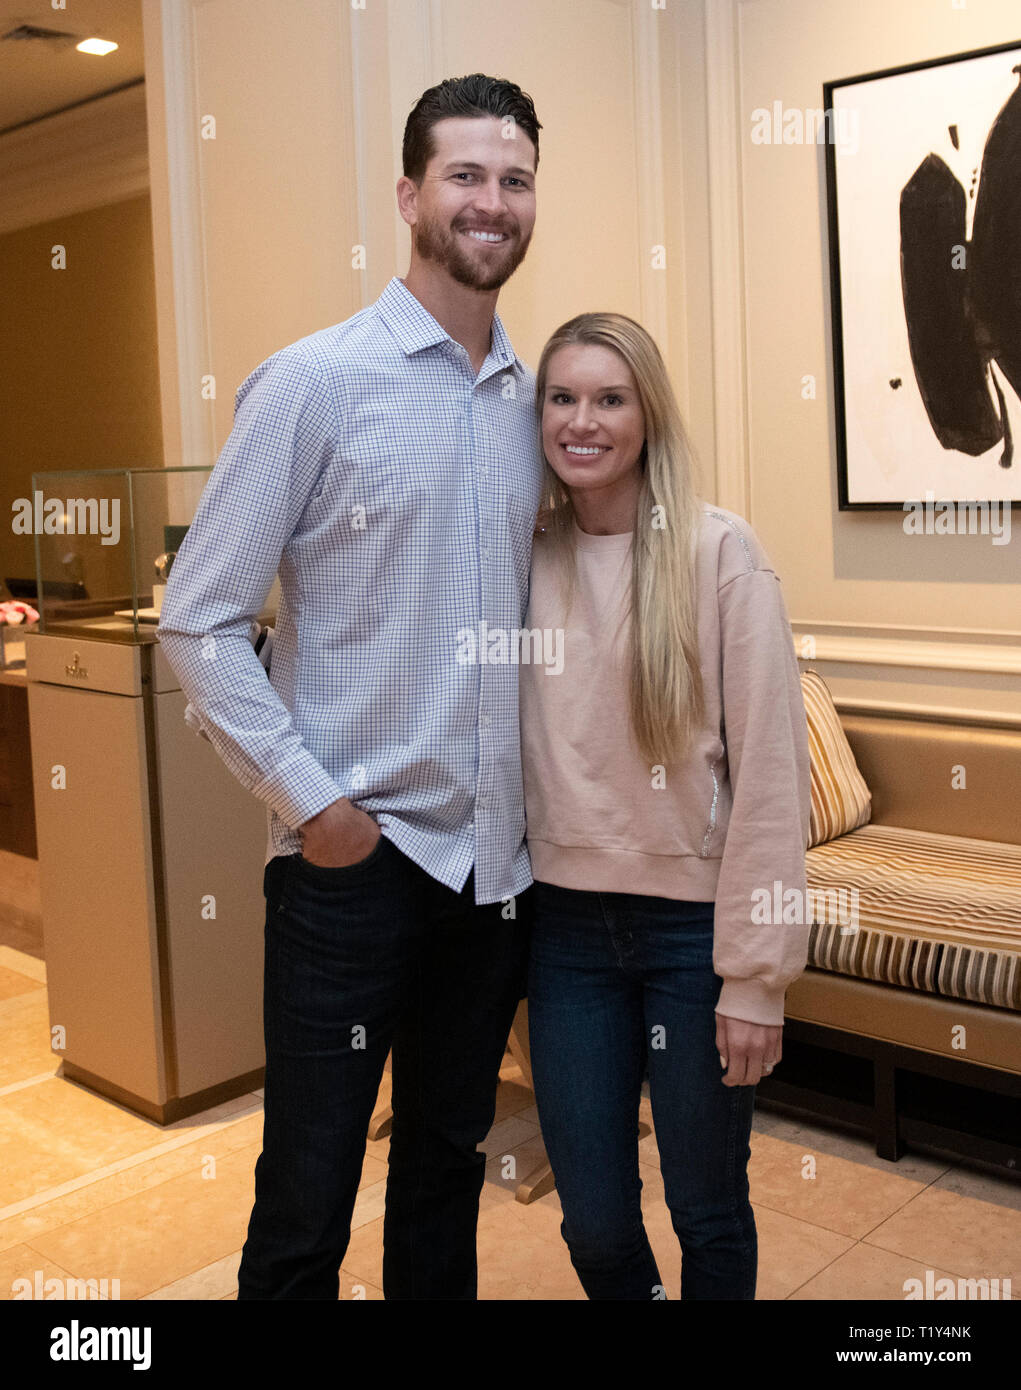 New York Mets Starting Pitcher Jacob Degrom 48 And His Wife Stacey Following A Press Conference On His New Five Year Contract Extension At The Ritz Carlton Hotel In Arlington Virginia On Wednesday March